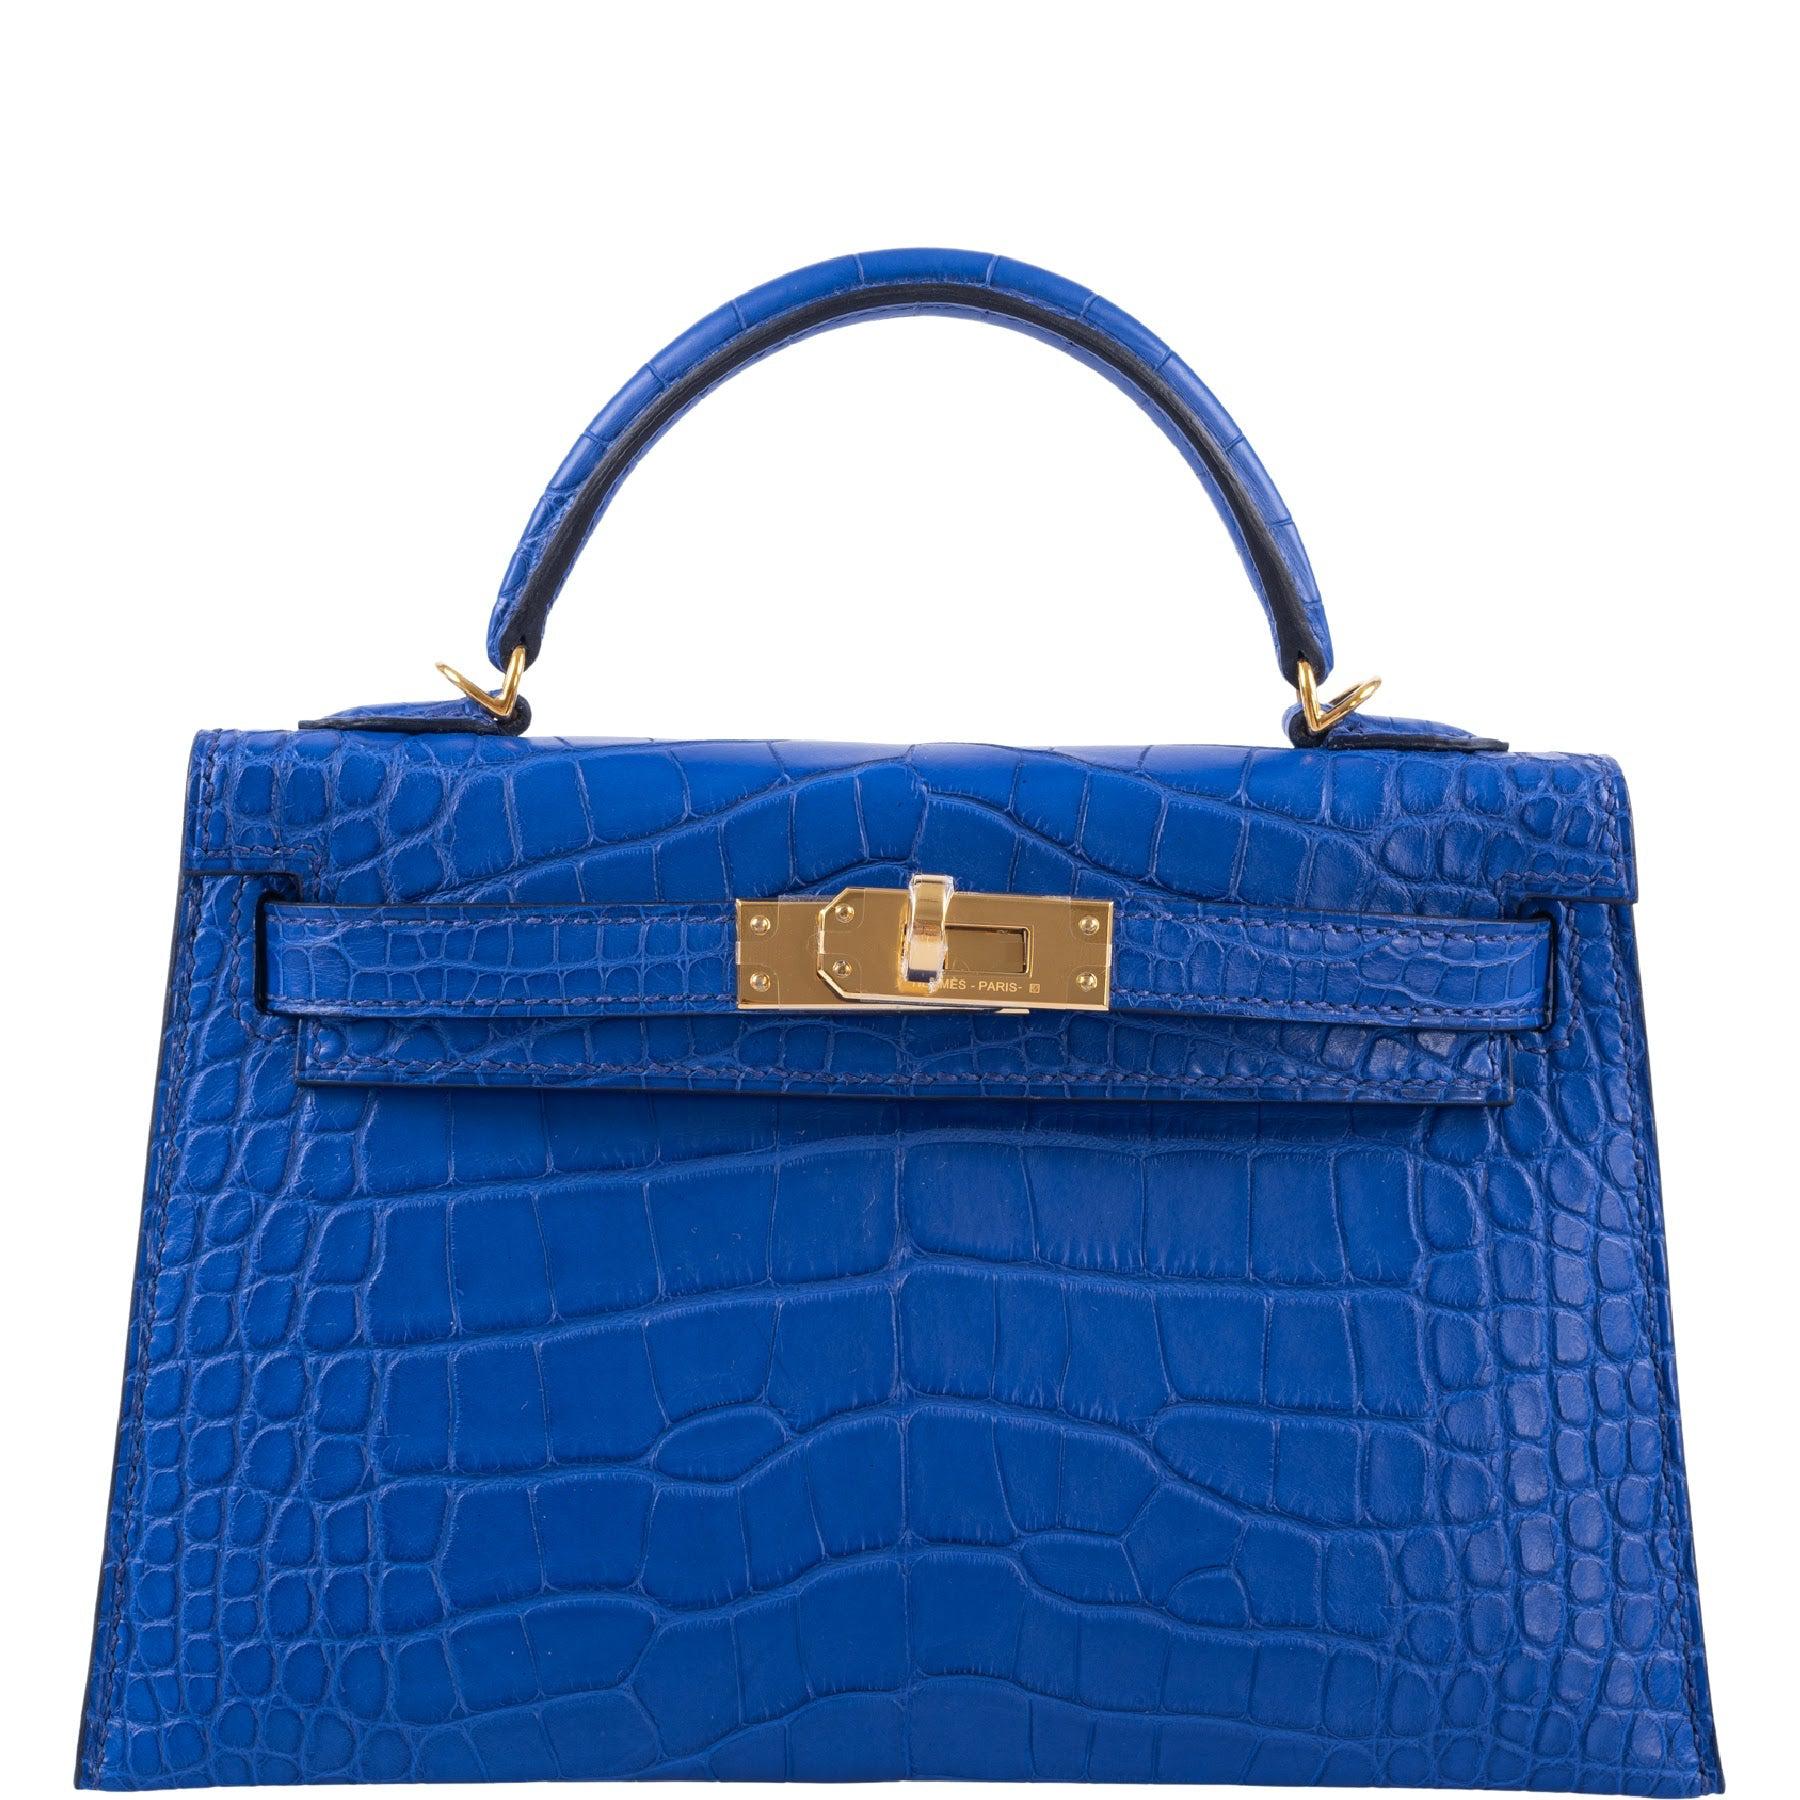 Hermes Limited Edition Verso Mini Kelly 20 Sellier Bag Vert Rousseau & Blue  Paon Alligator with Permabrass Hardware